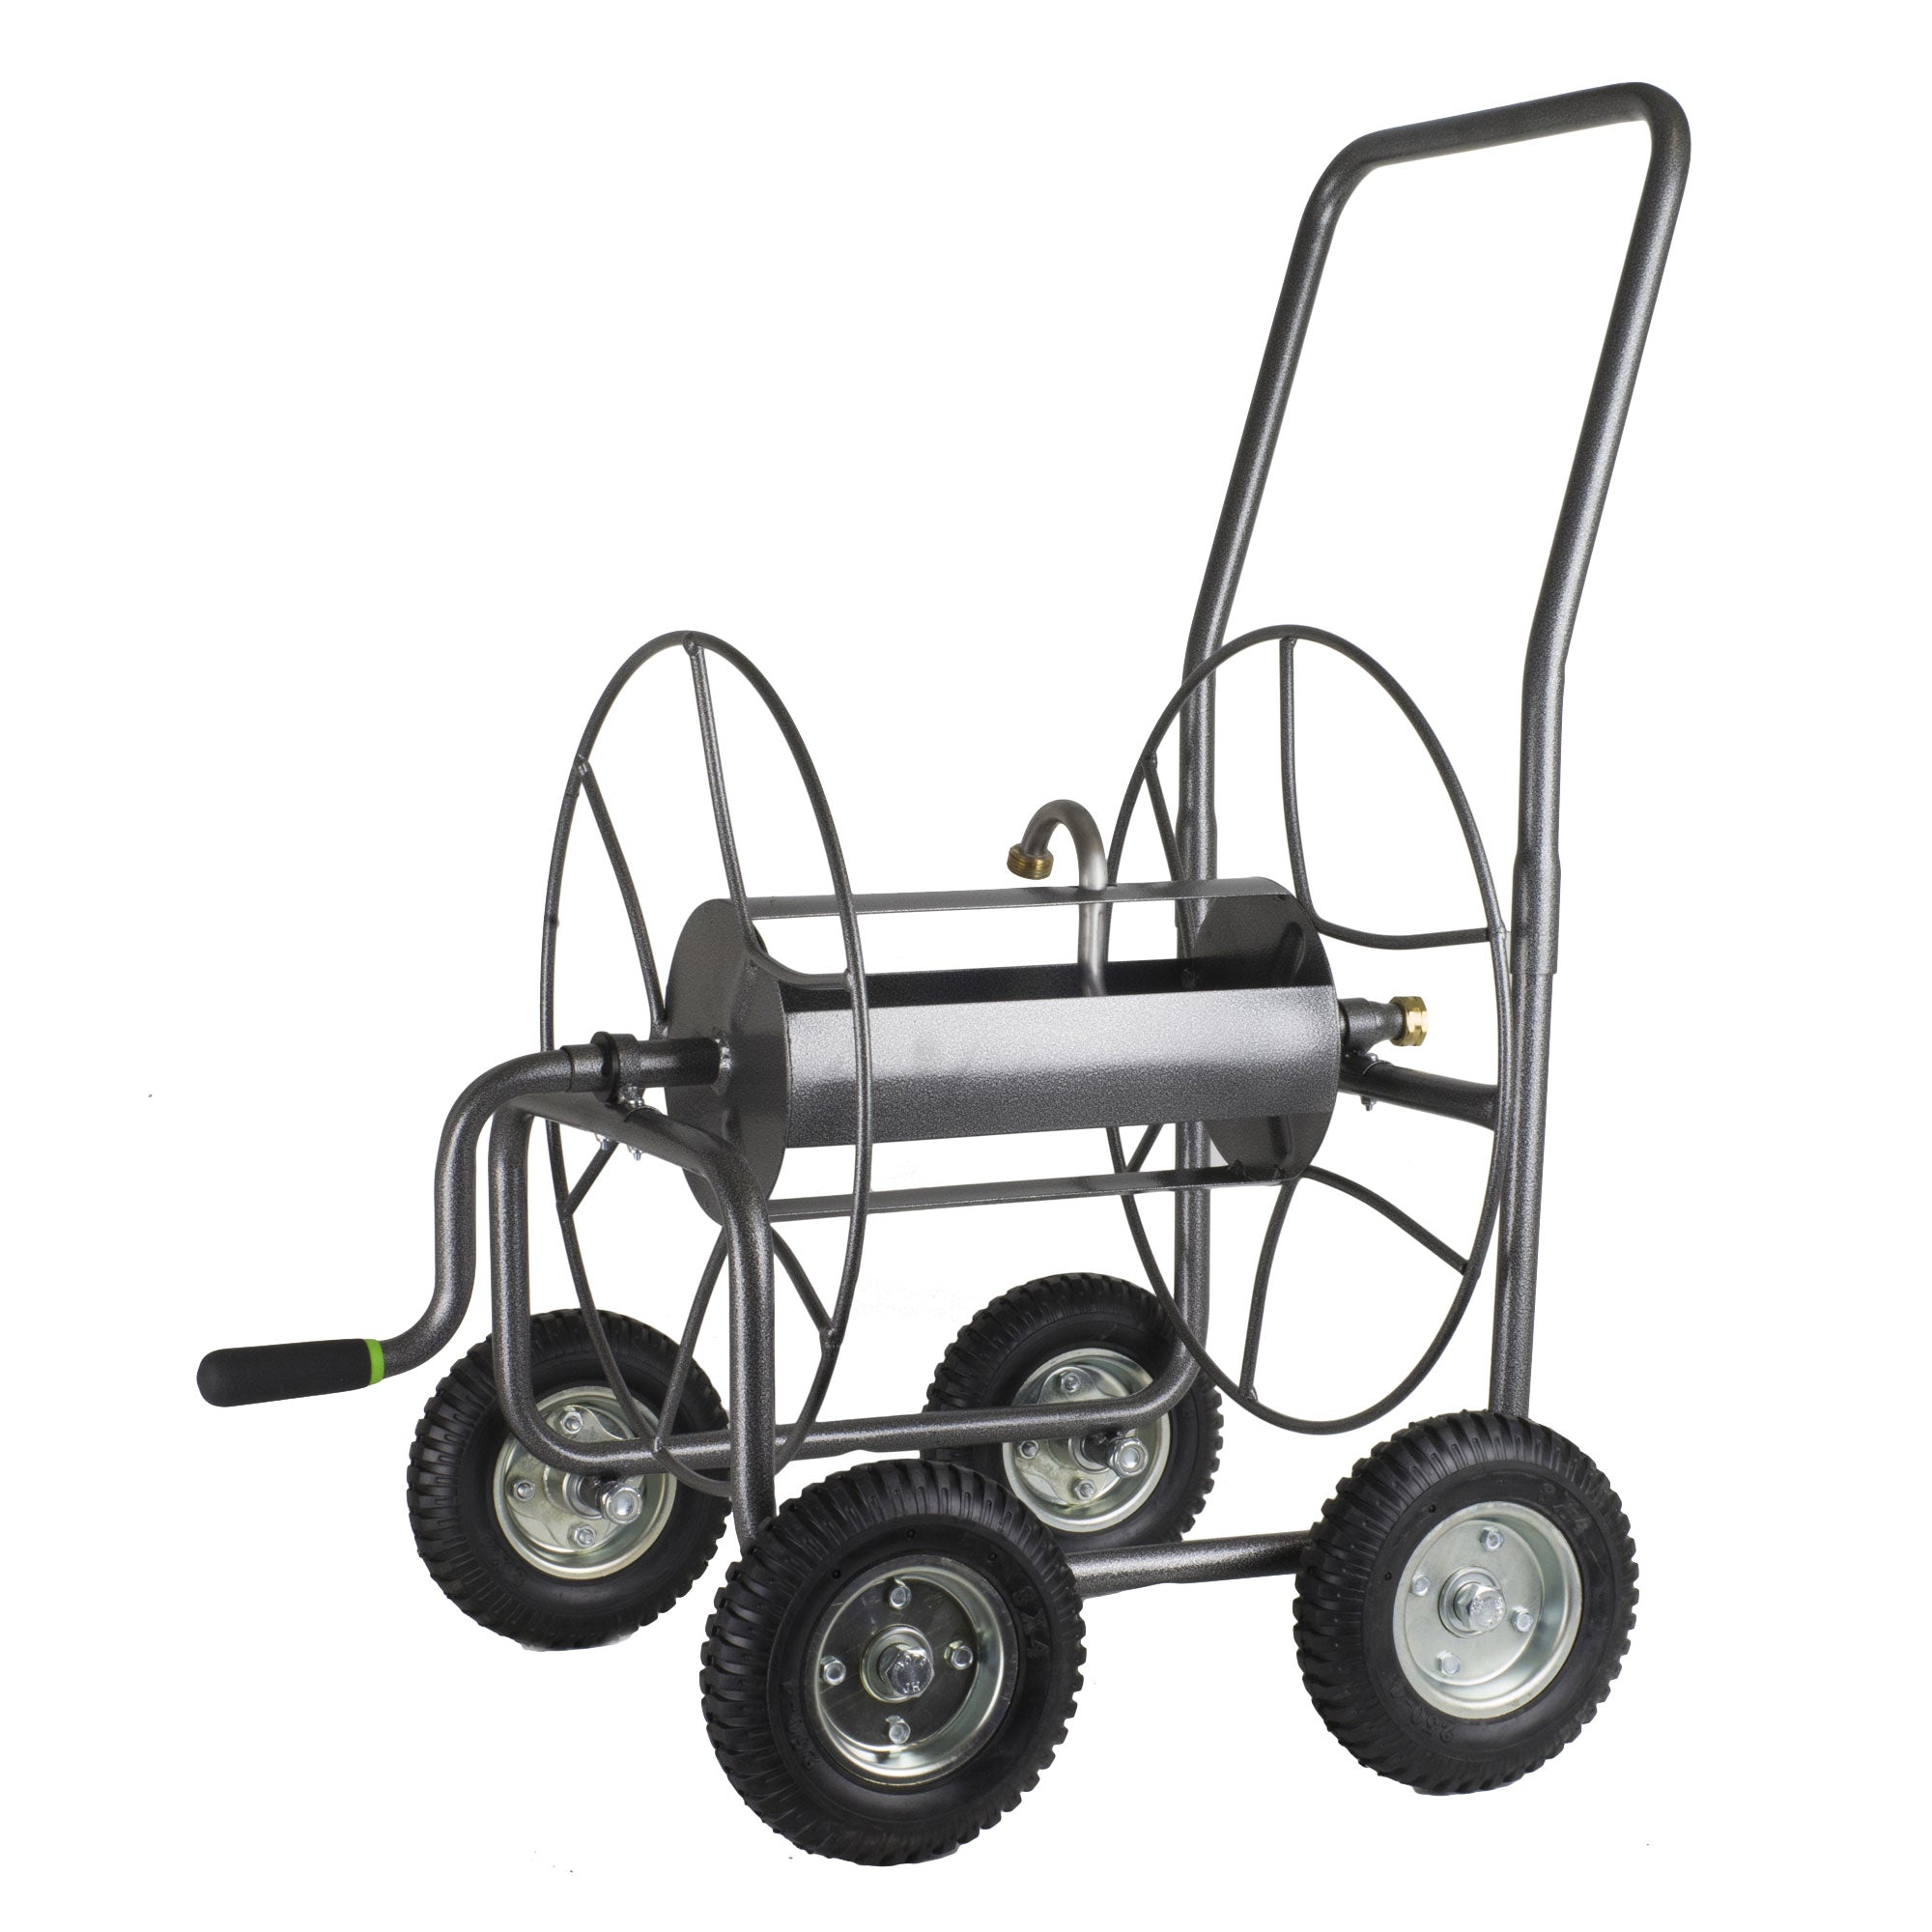 Portable Hose Pipe Reel,Hose Reel Cart Garden Hose Carts with Wheels Heavy  Duty Portable Water Hose Cart 2 Wheels Outdoor Yard Lawn Planting Truck